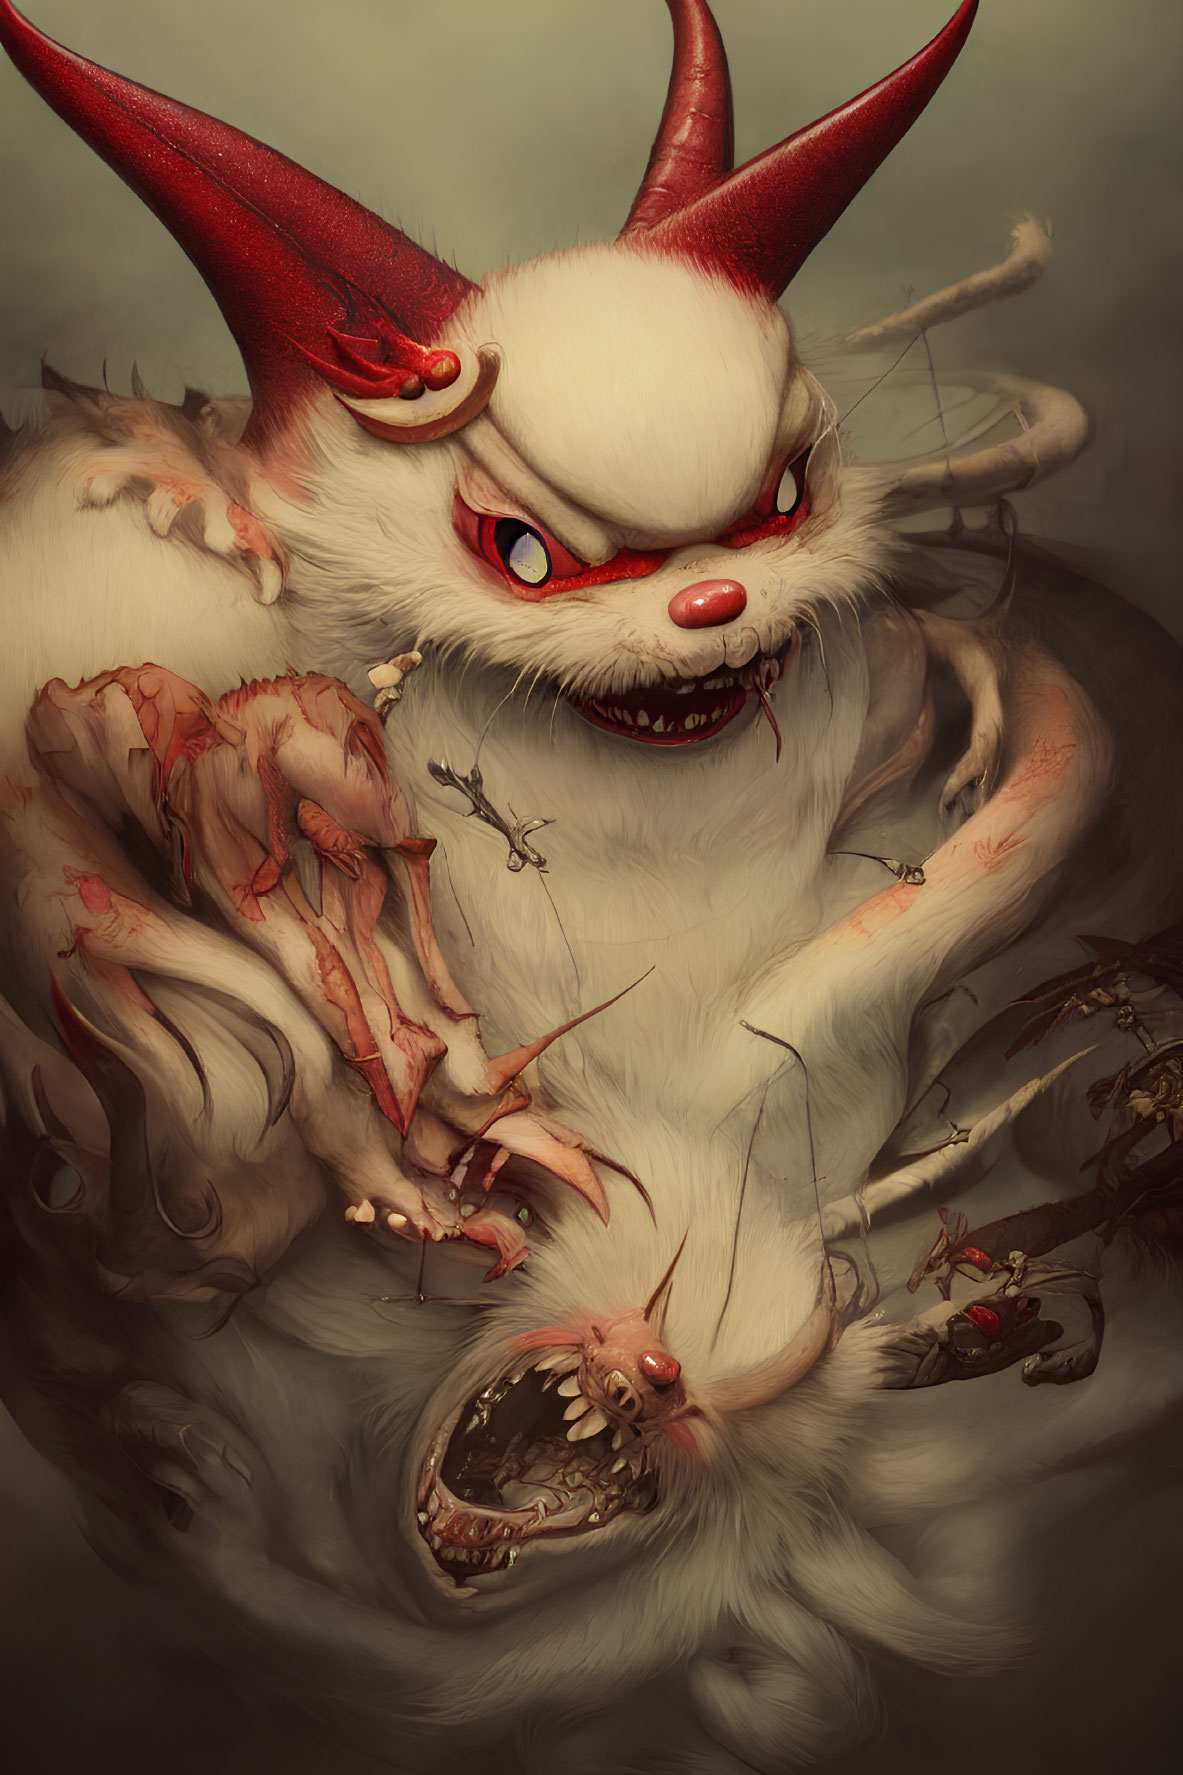 Monstrous white rabbit with red eyes, horns, sharp teeth, and exposed flesh surrounded by insects